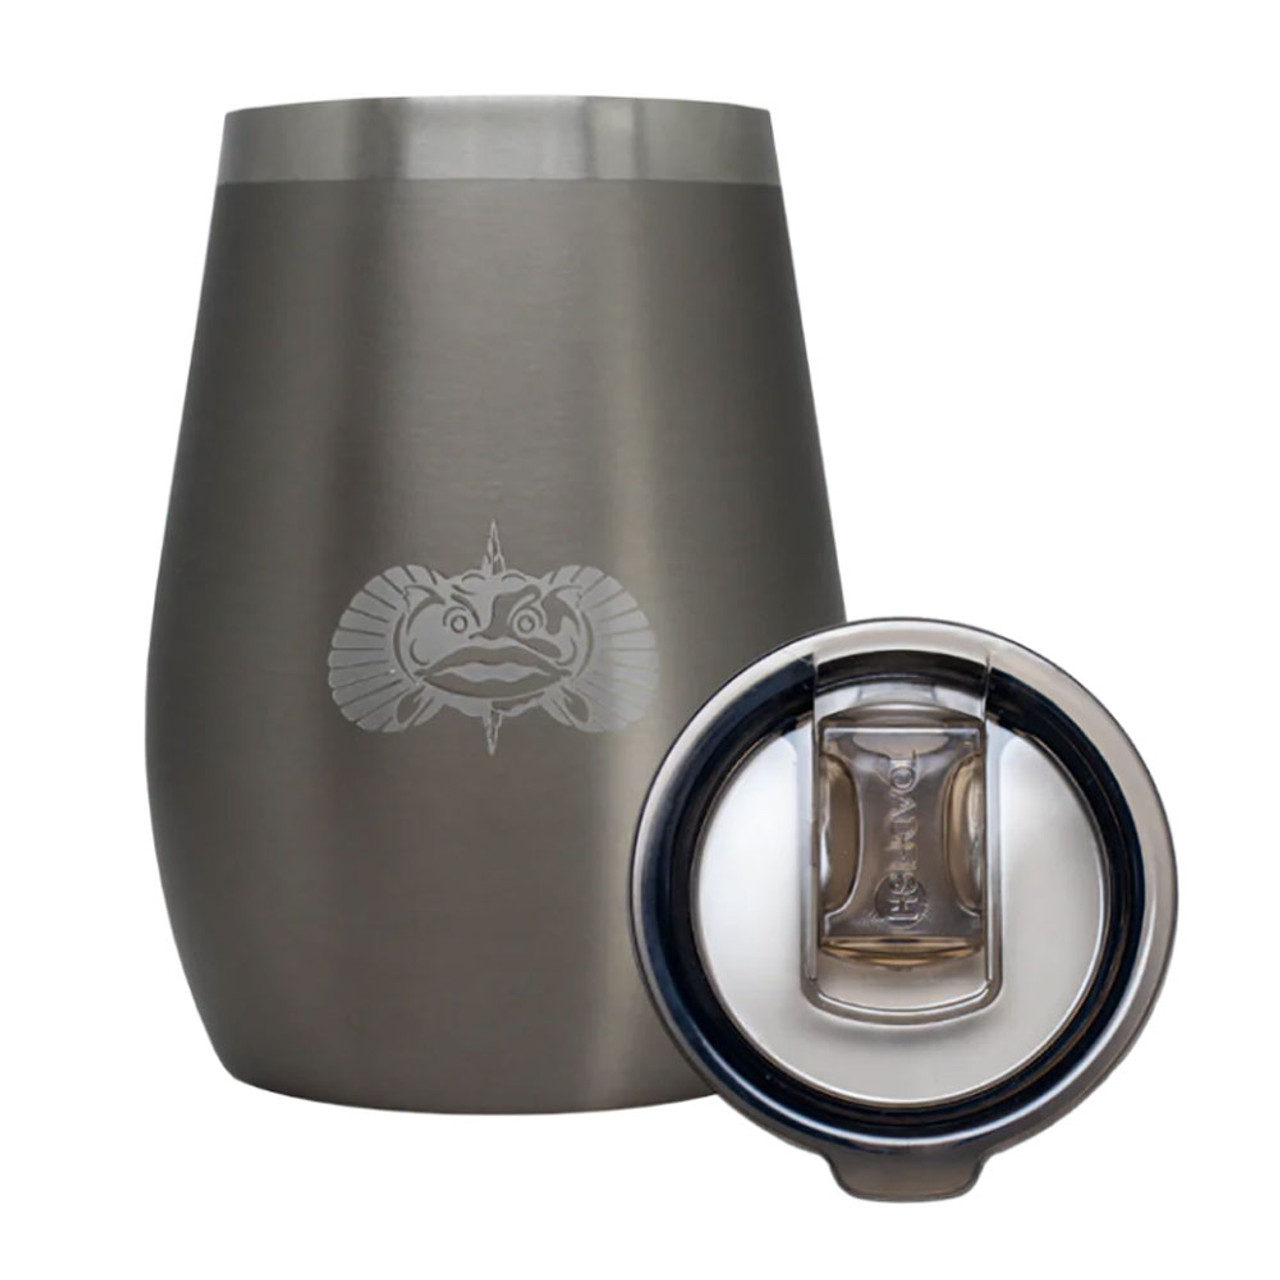 Teal Toadfish Outfitters The Anchor Stainless Steel Non-Tipping Cup Holder